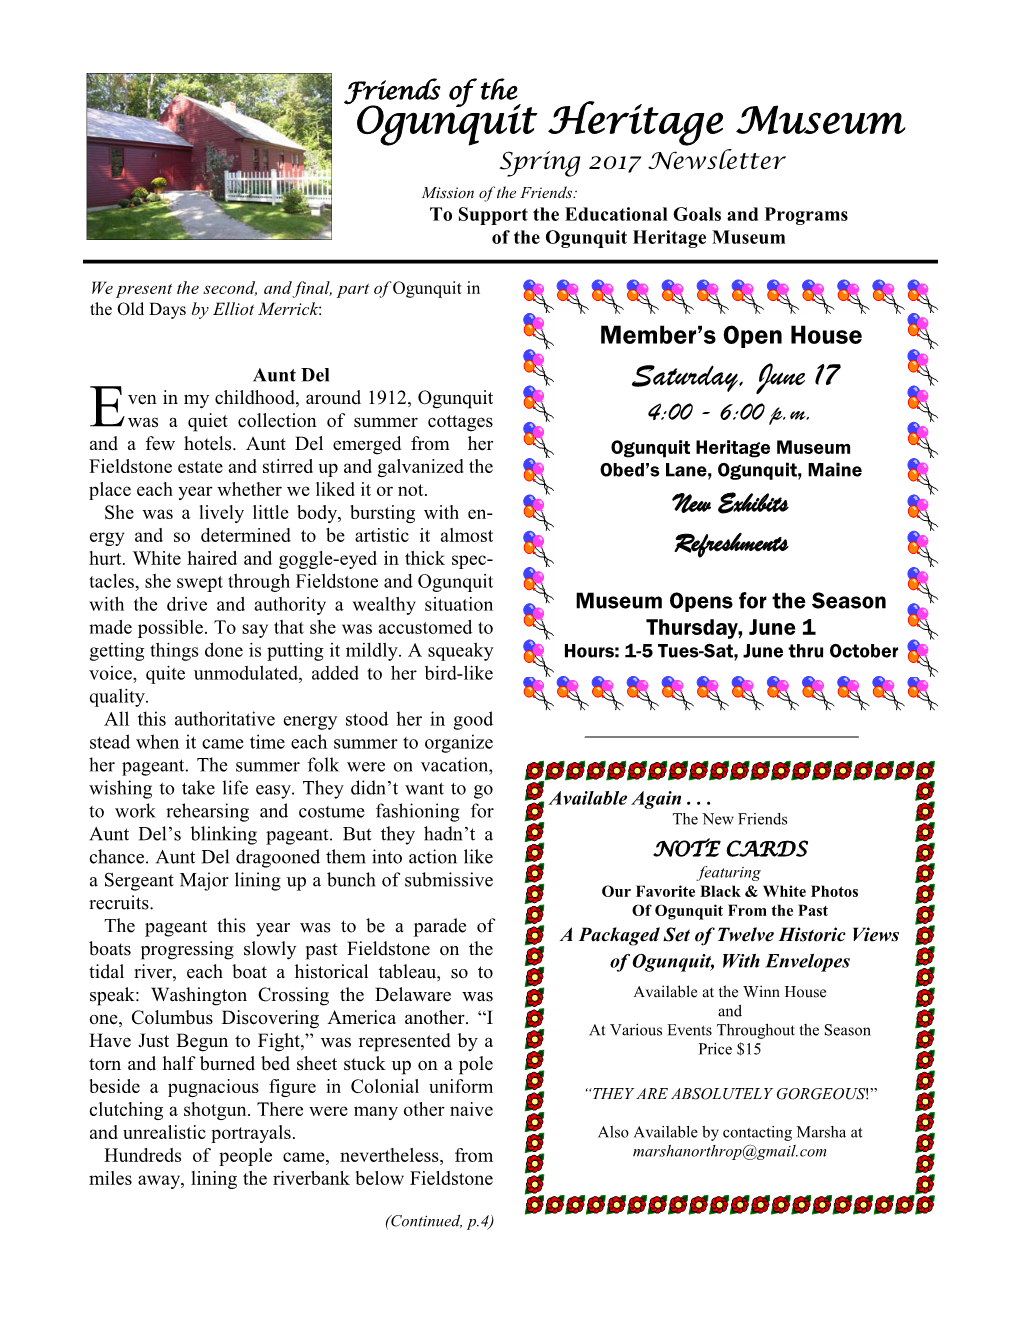 Spring 2017 Newsletter Mission of the Friends: to Support the Educational Goals and Programs of the Ogunquit Heritage Museum